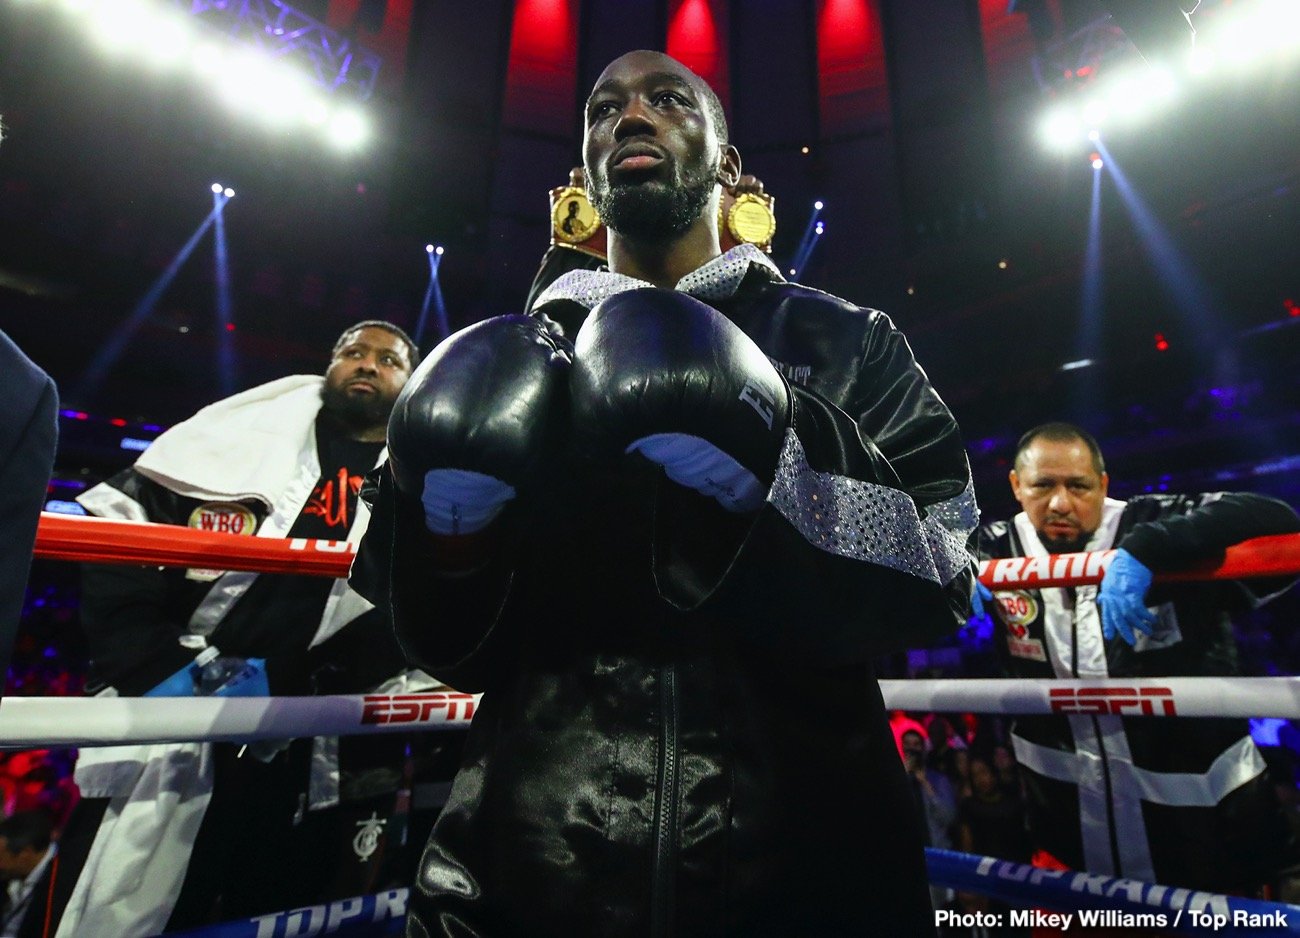 Image: Terence Crawford vs. Josh Taylor targeted for early 2022